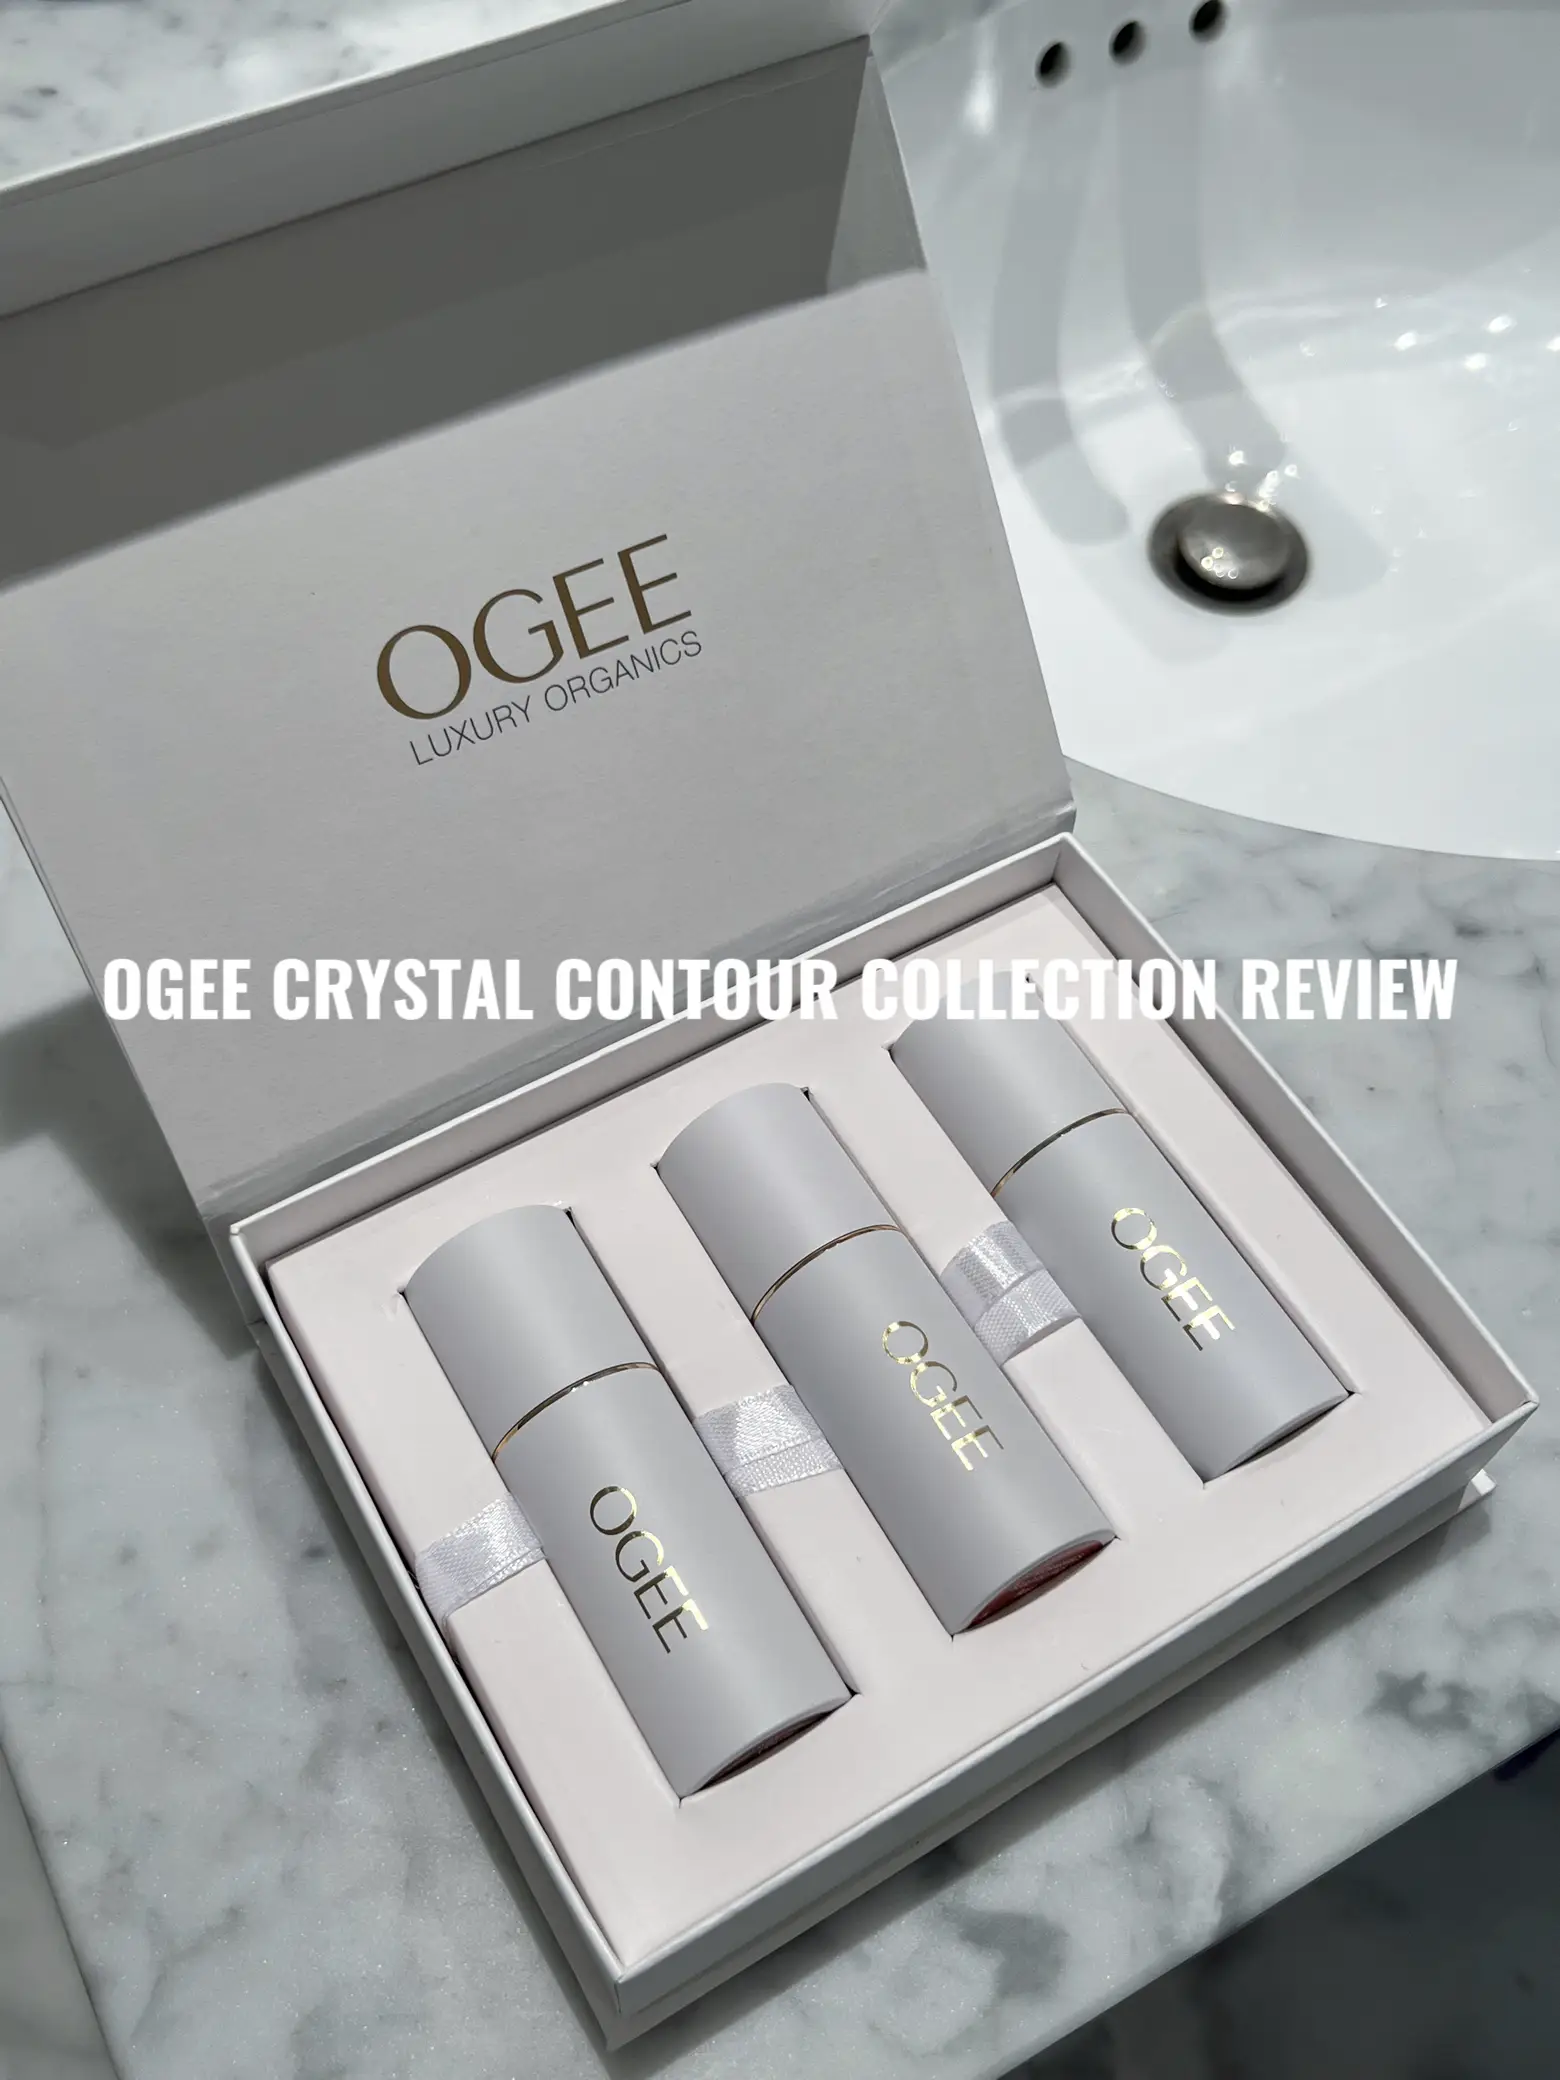 Viral OGEE Golden Contour set review 🌞, Gallery posted by michxmakeup